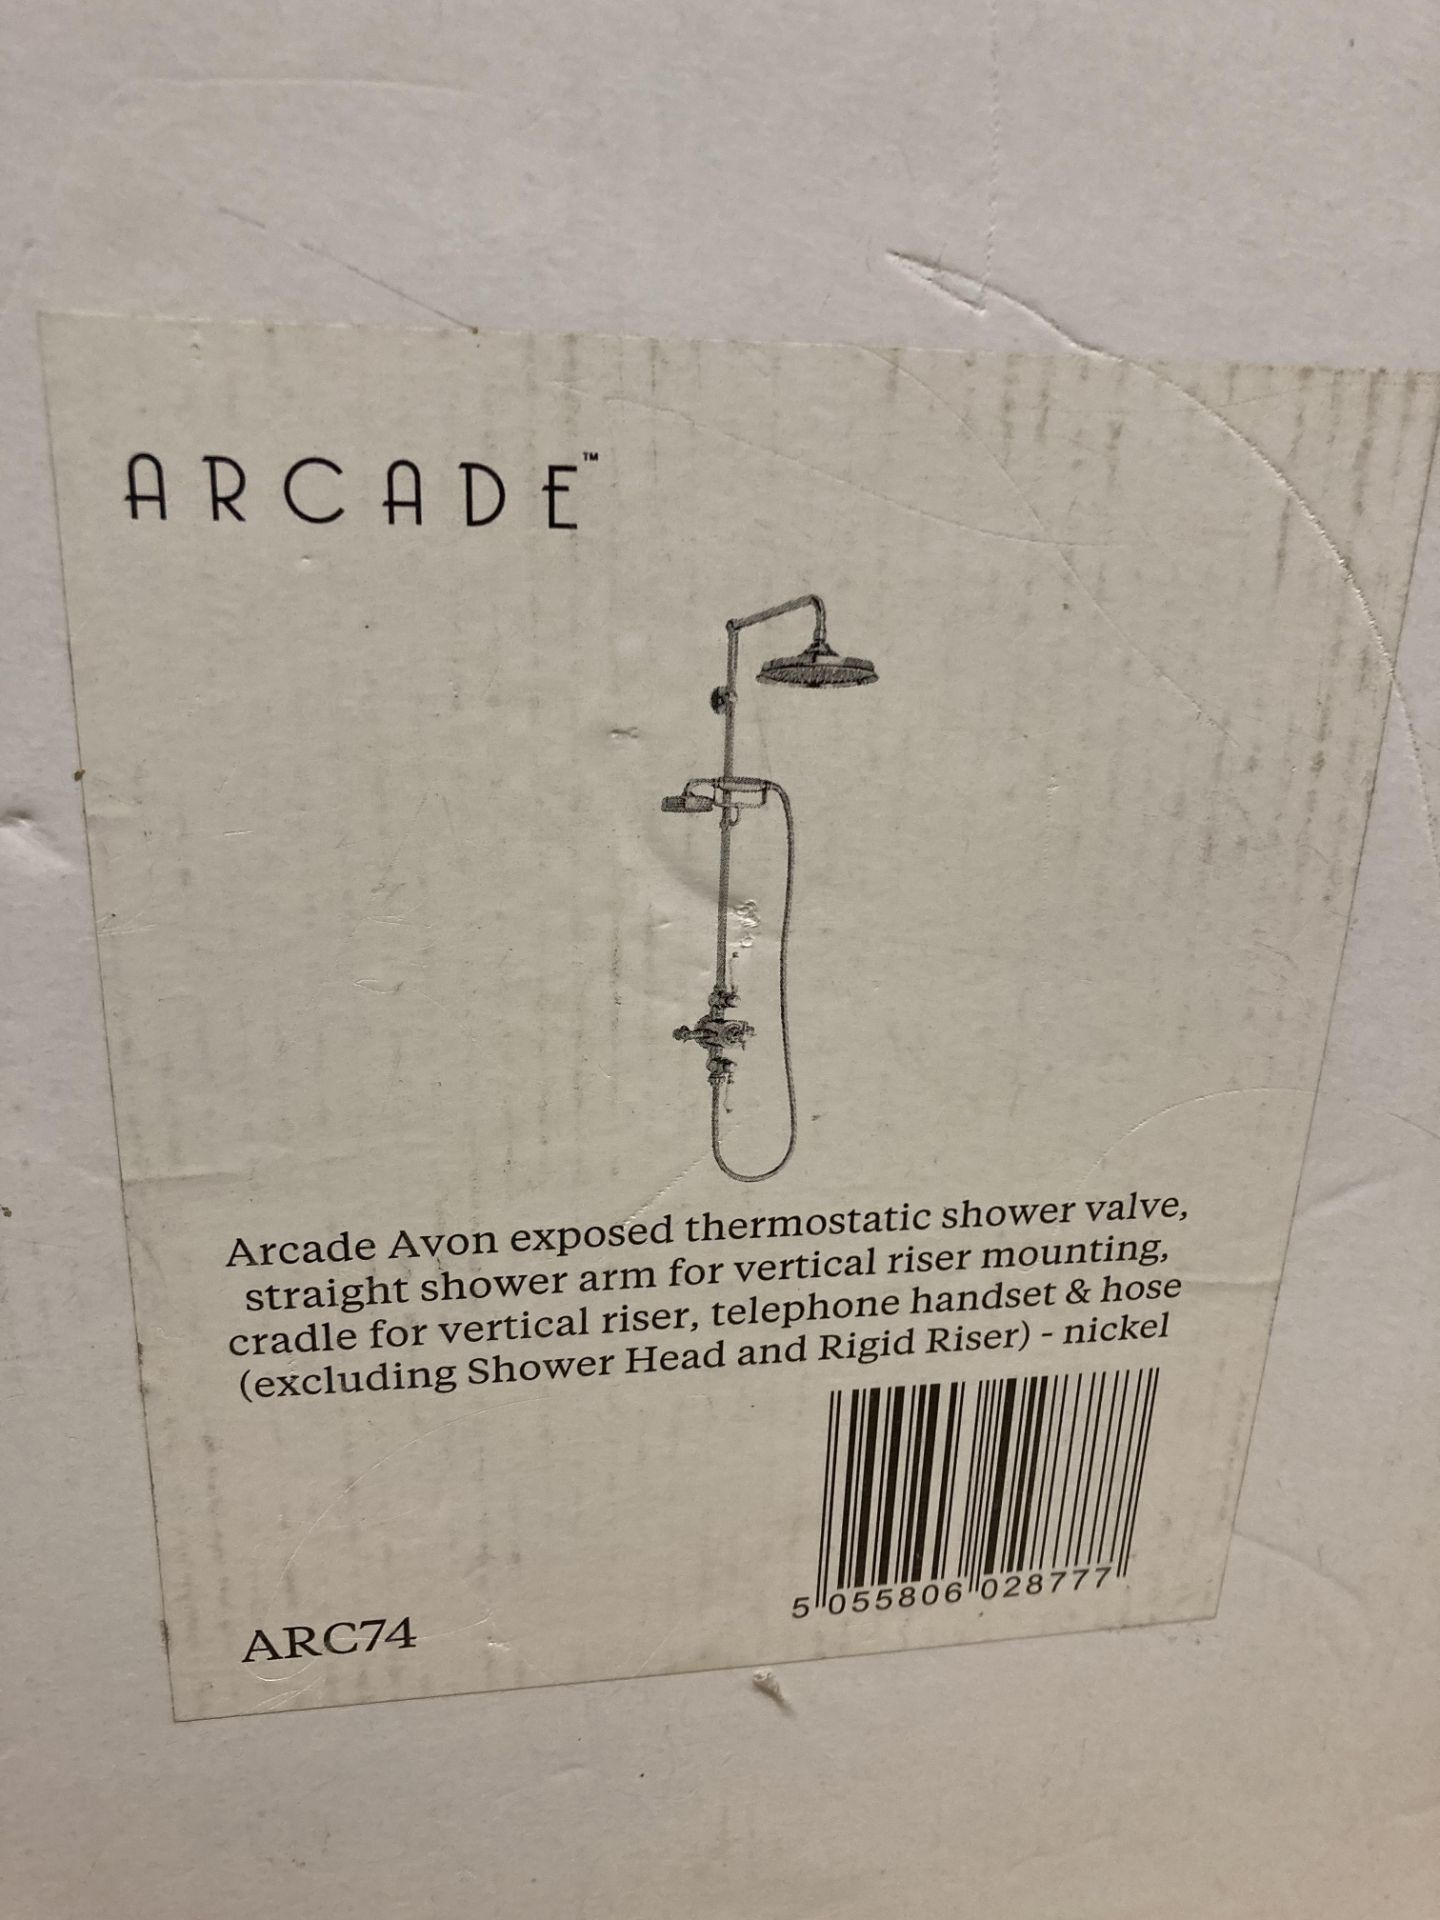 Arcade Avon exposed thermostatic shower incomplete (saleroom location: AA08) Further